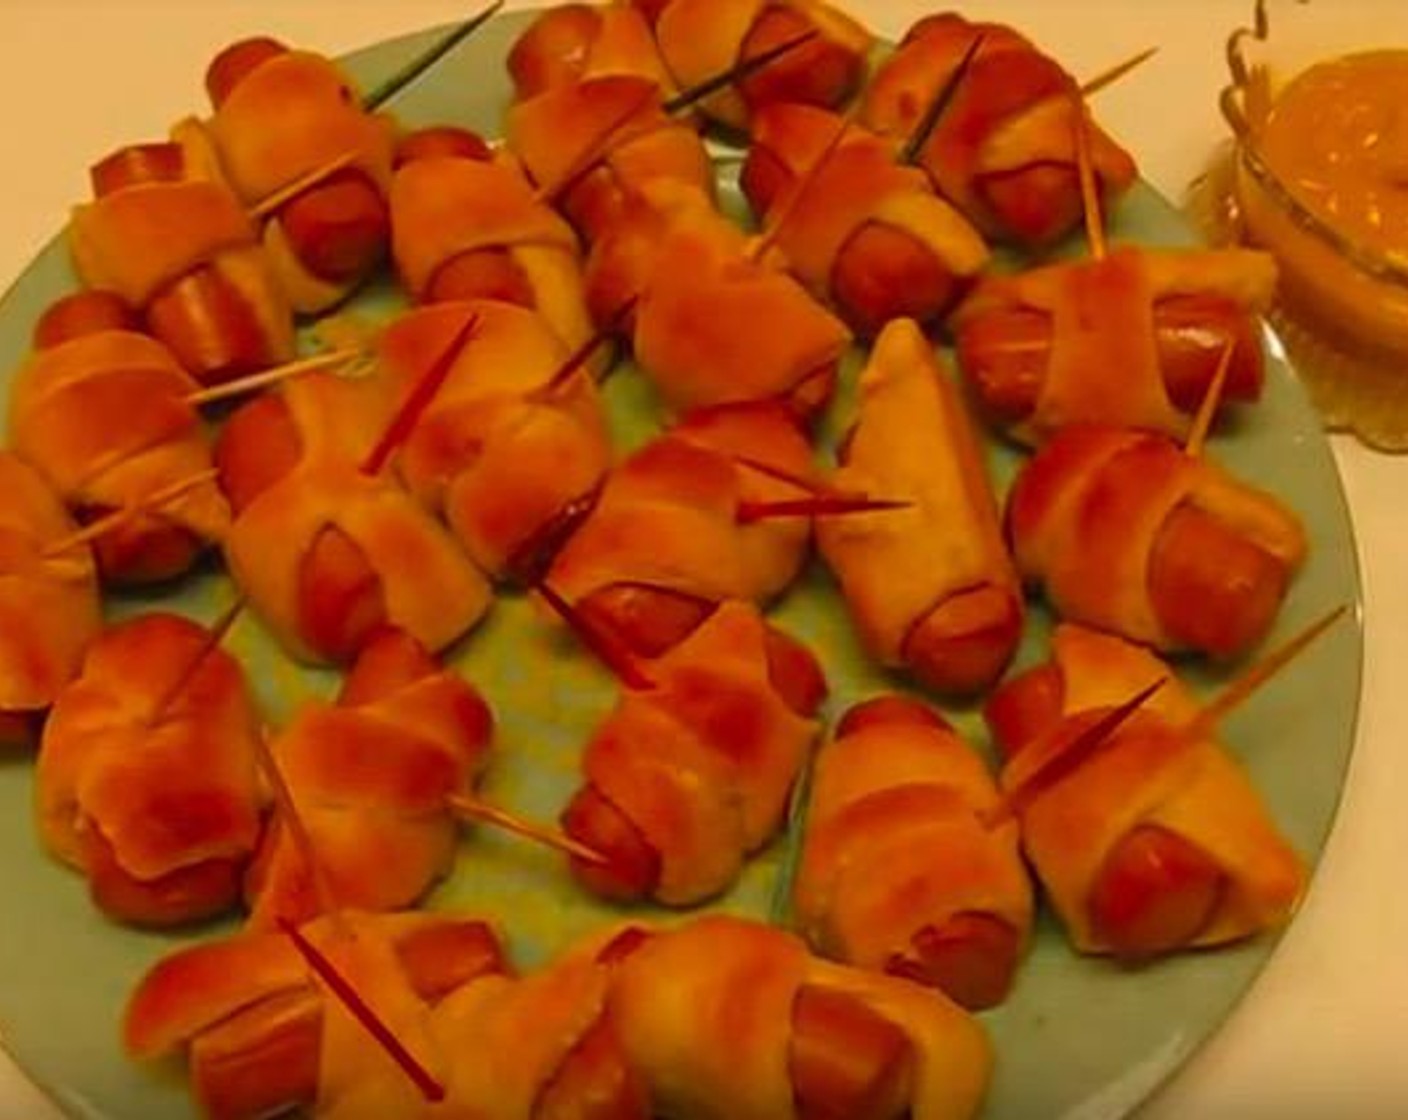 Party Pigs in a Blanket